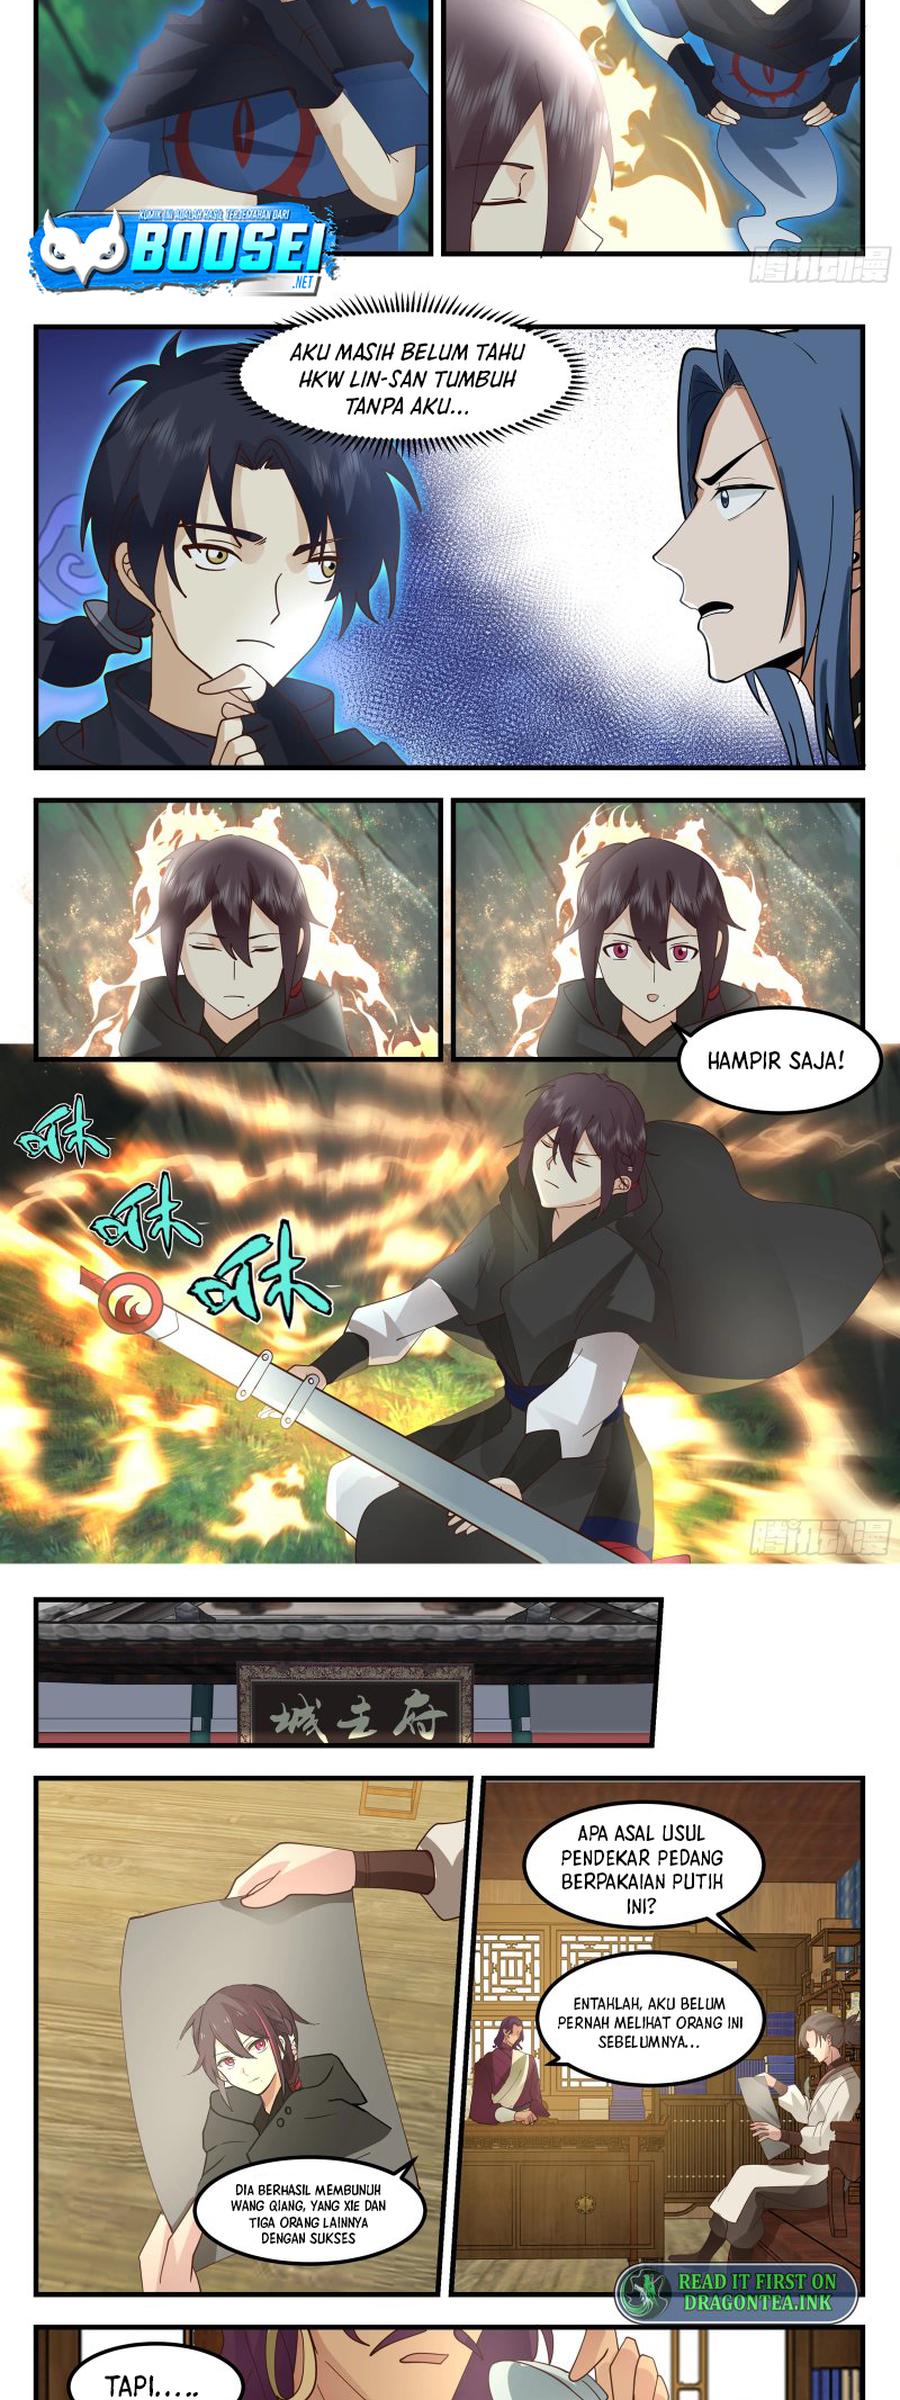 A Sword’s Evolution Begins From Killing Chapter 75